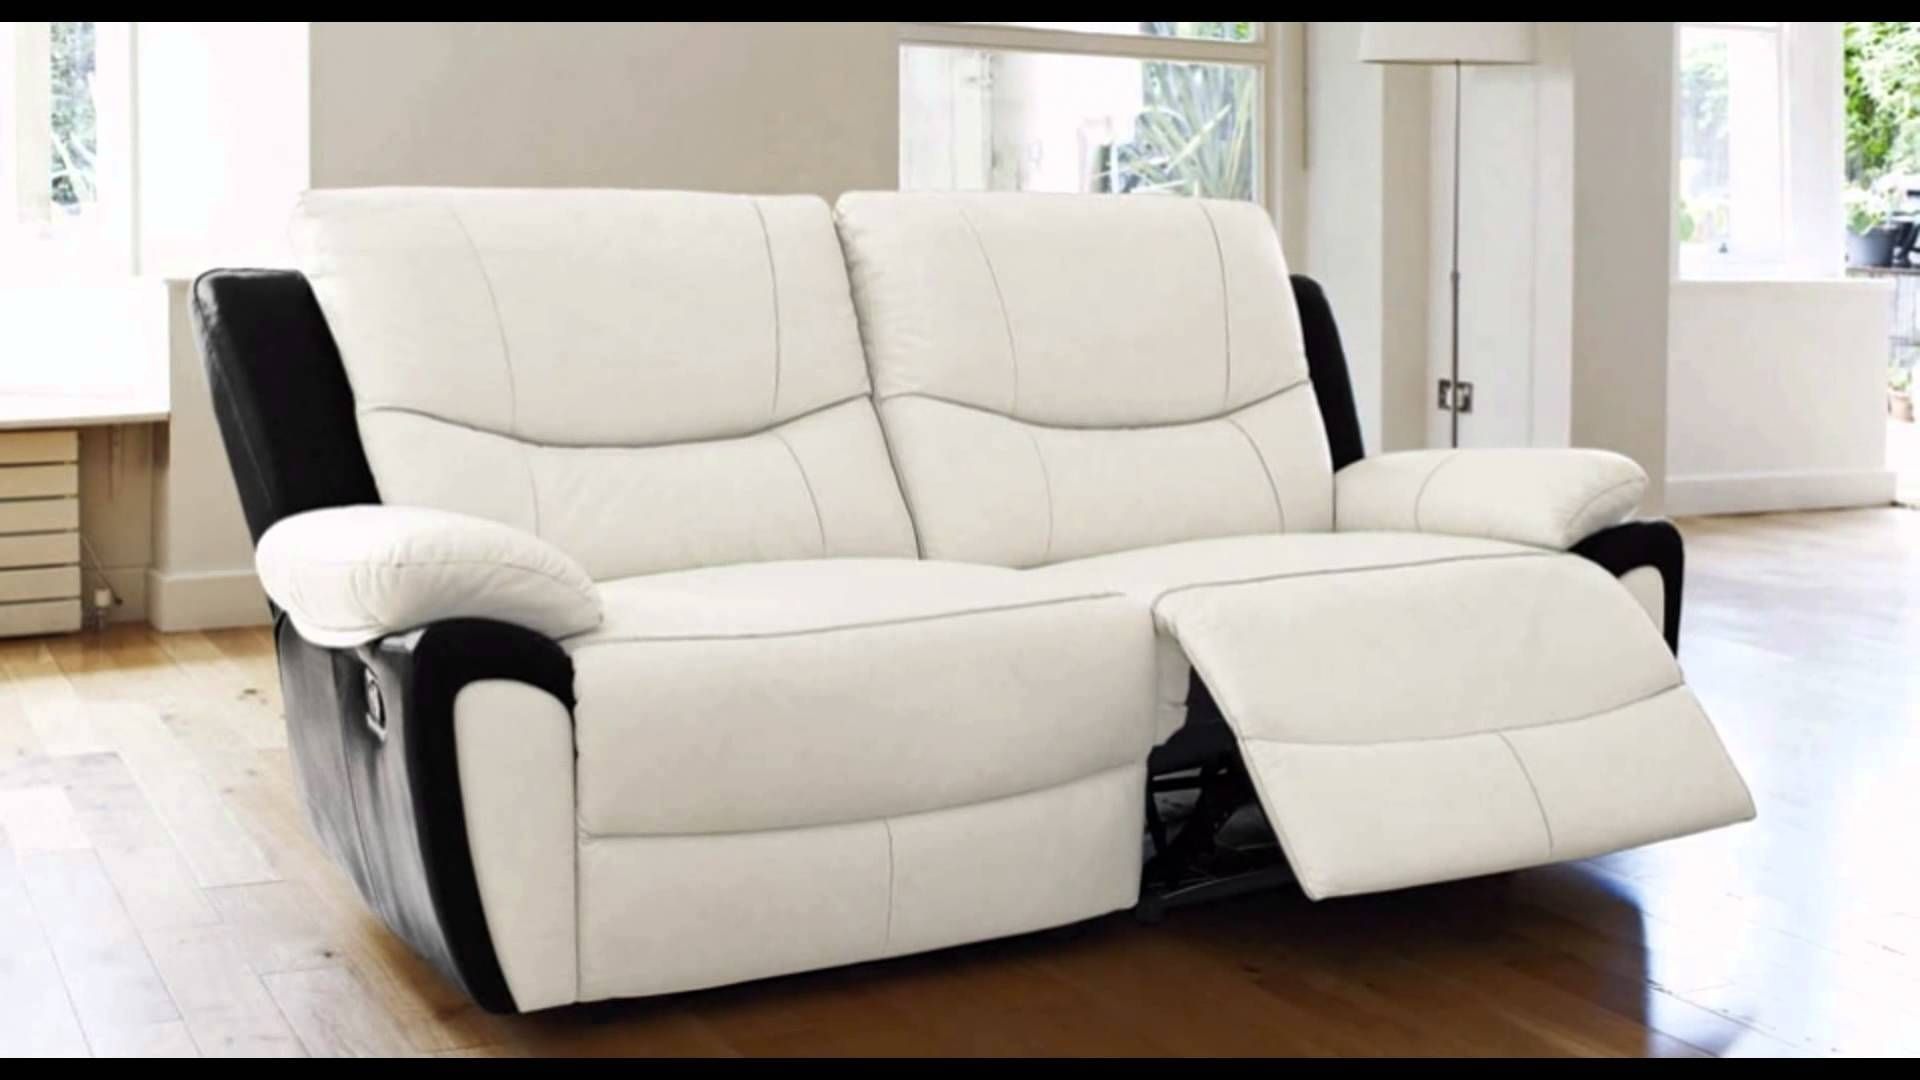 Rv Recliner Sofa 81 With Rv Recliner Sofa | Jinanhongyu In Rv Recliner Sofas (View 5 of 15)